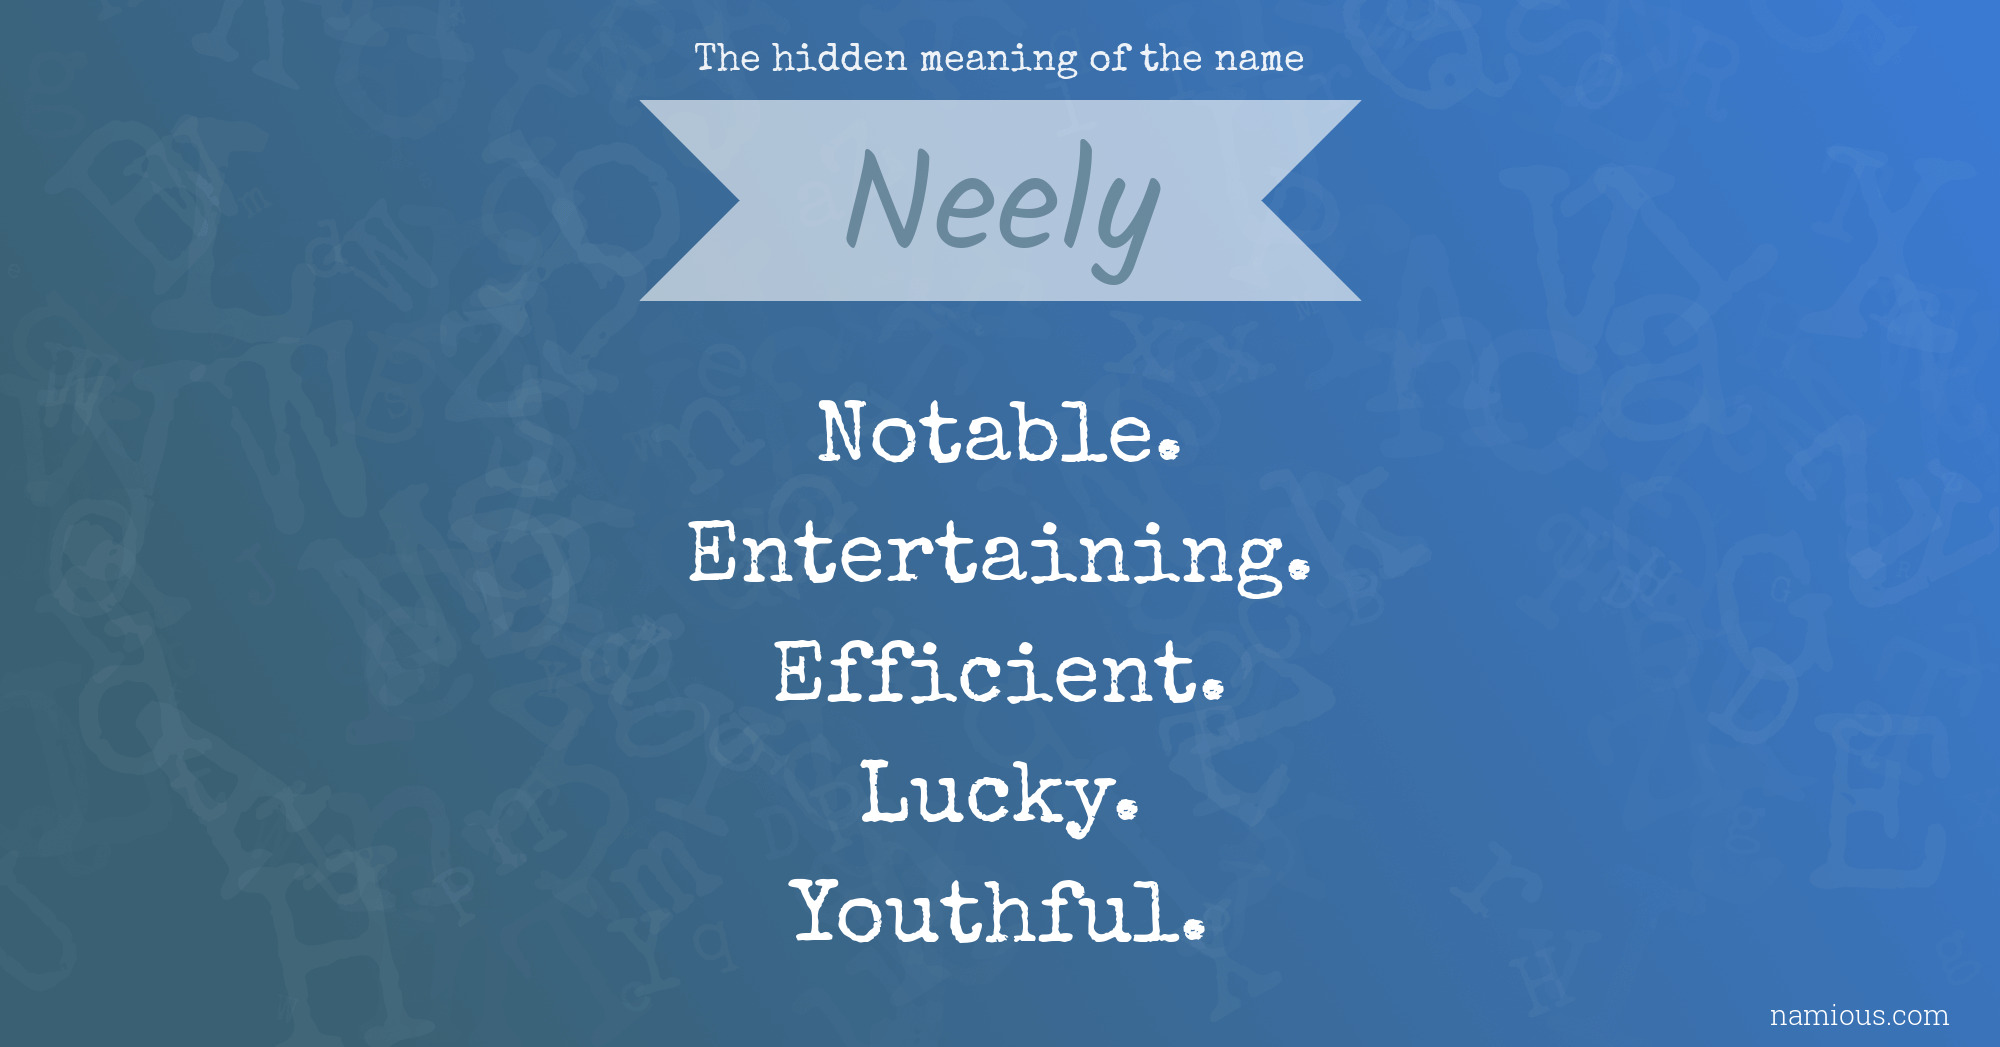 The hidden meaning of the name Neely